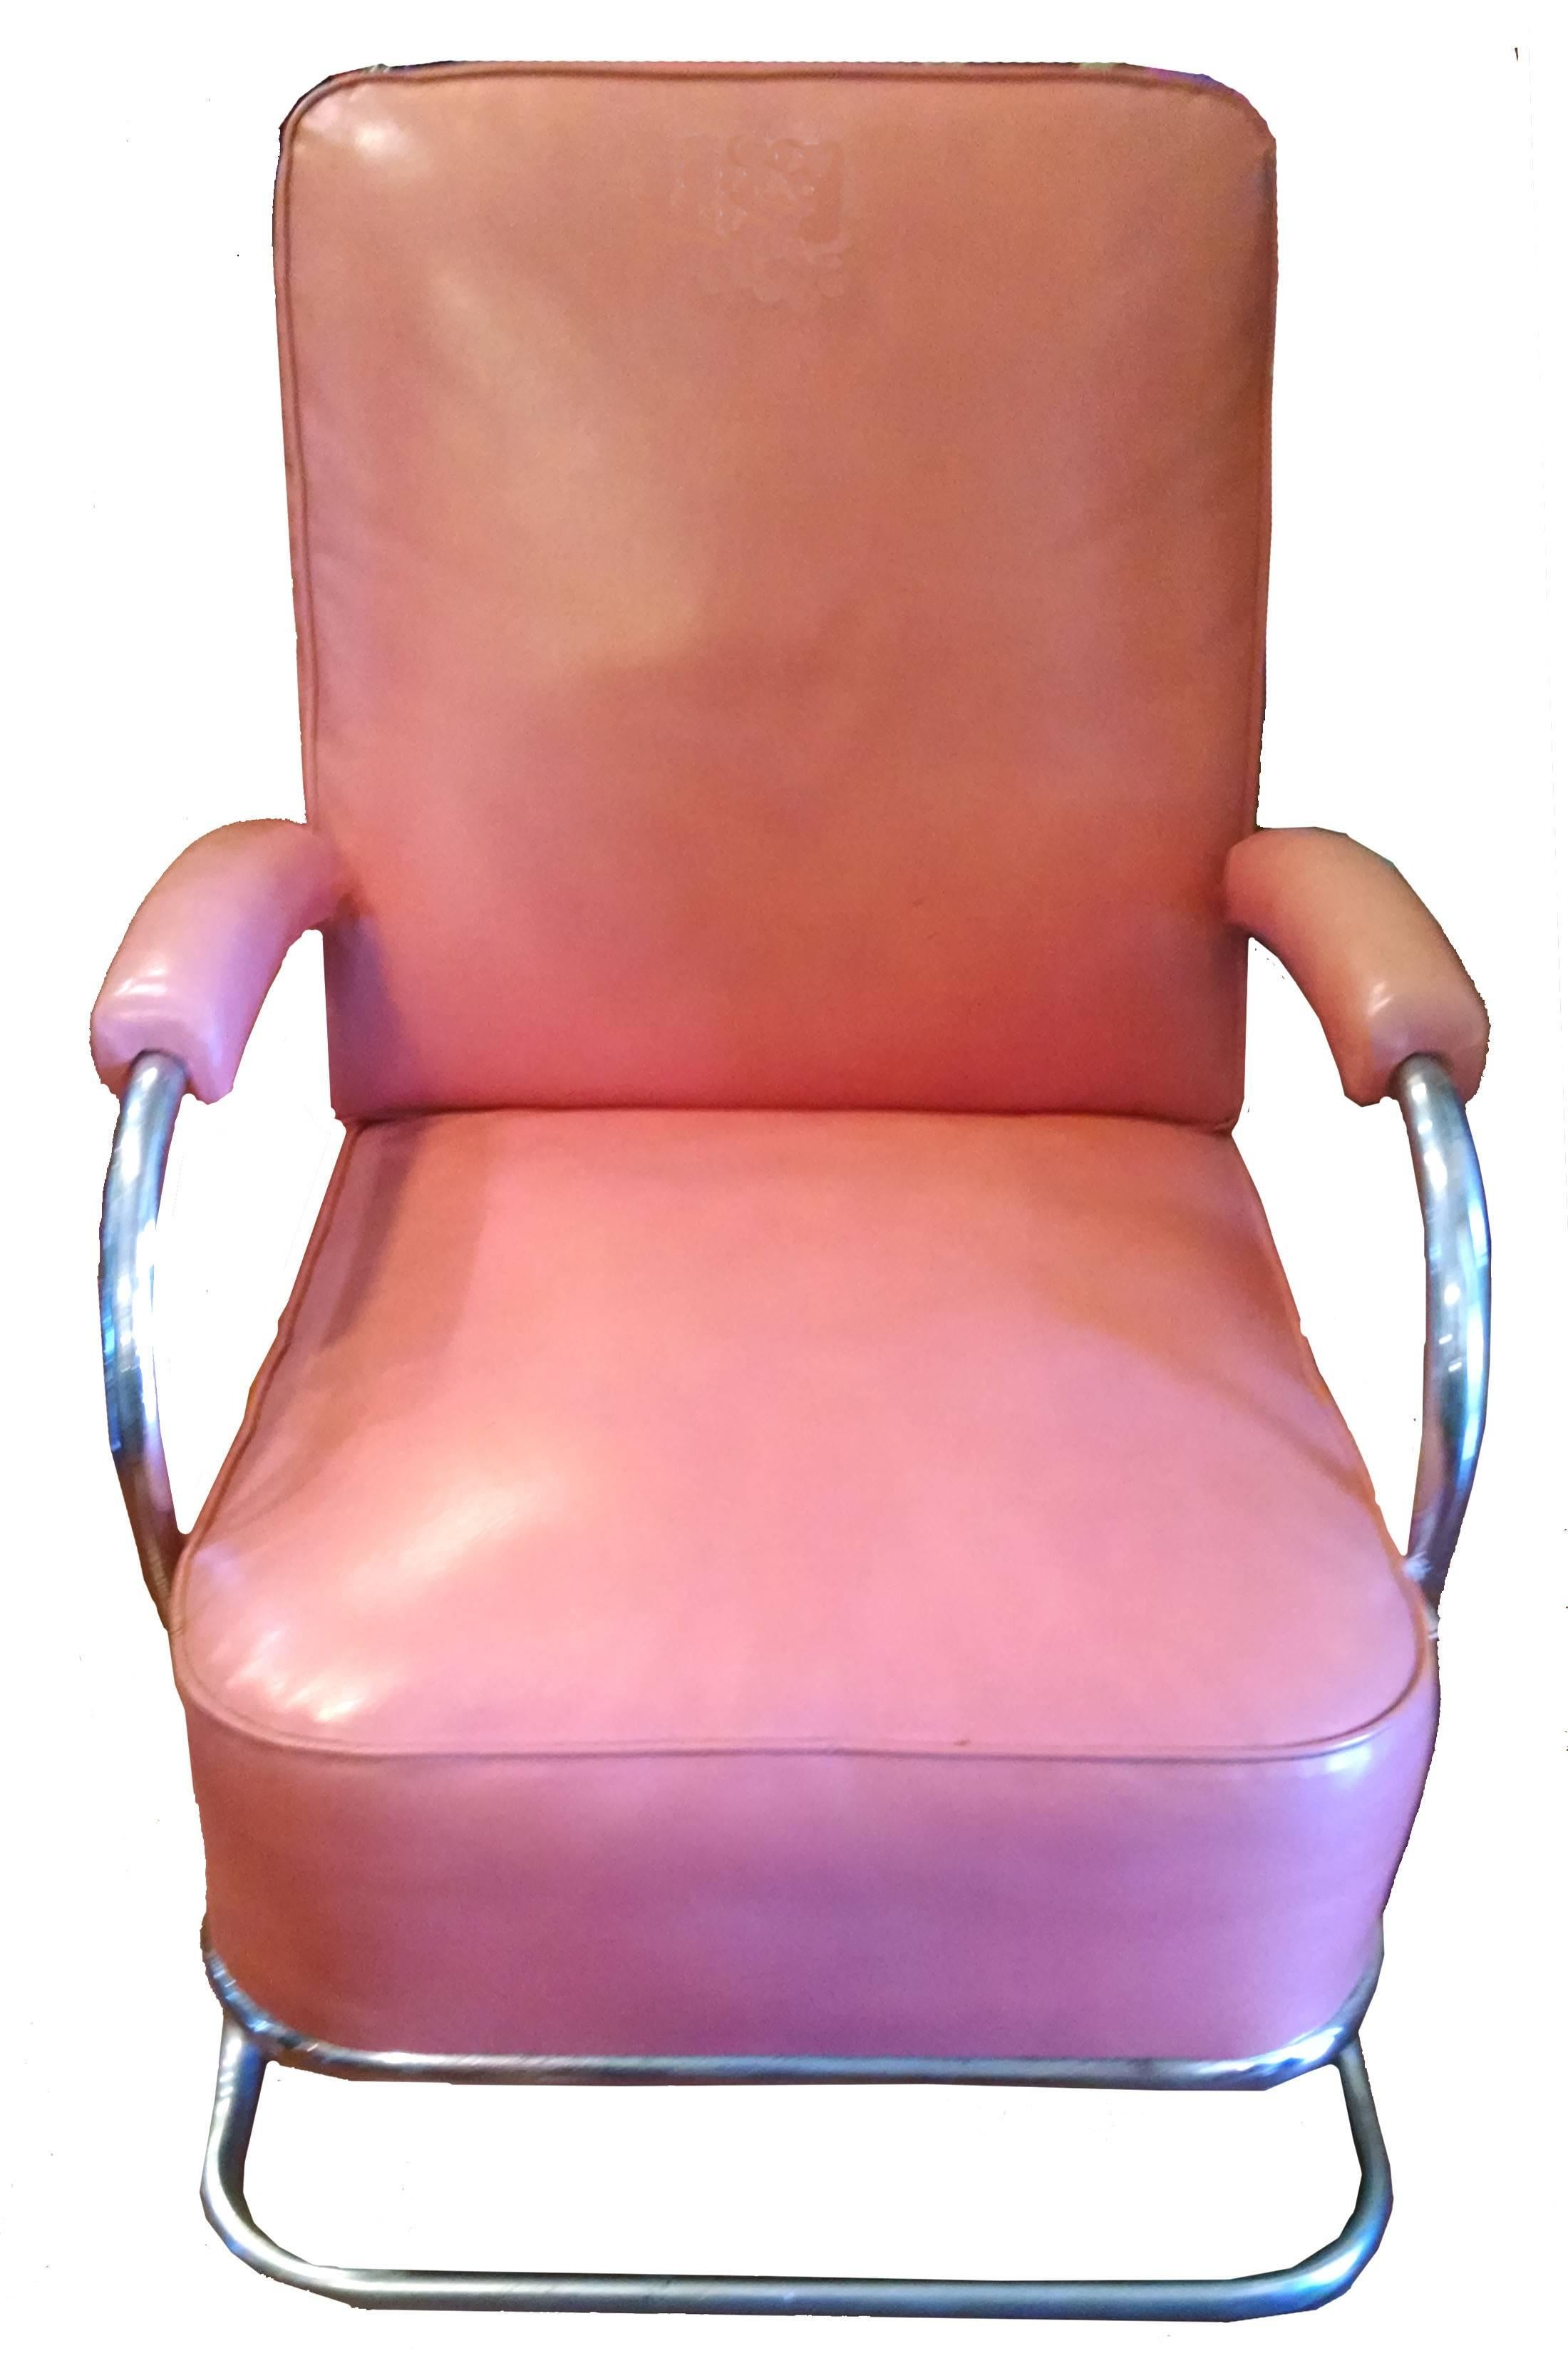 Iconic Wolfgang Hoffmann Art Deco streamlined design for Howell lounge chair, circa 1936. Tubular chrome frame and lovely soft peach faux leather upholstery with matching arms. Some normal wear/pitting to original chrome, not re-chromed. Measures